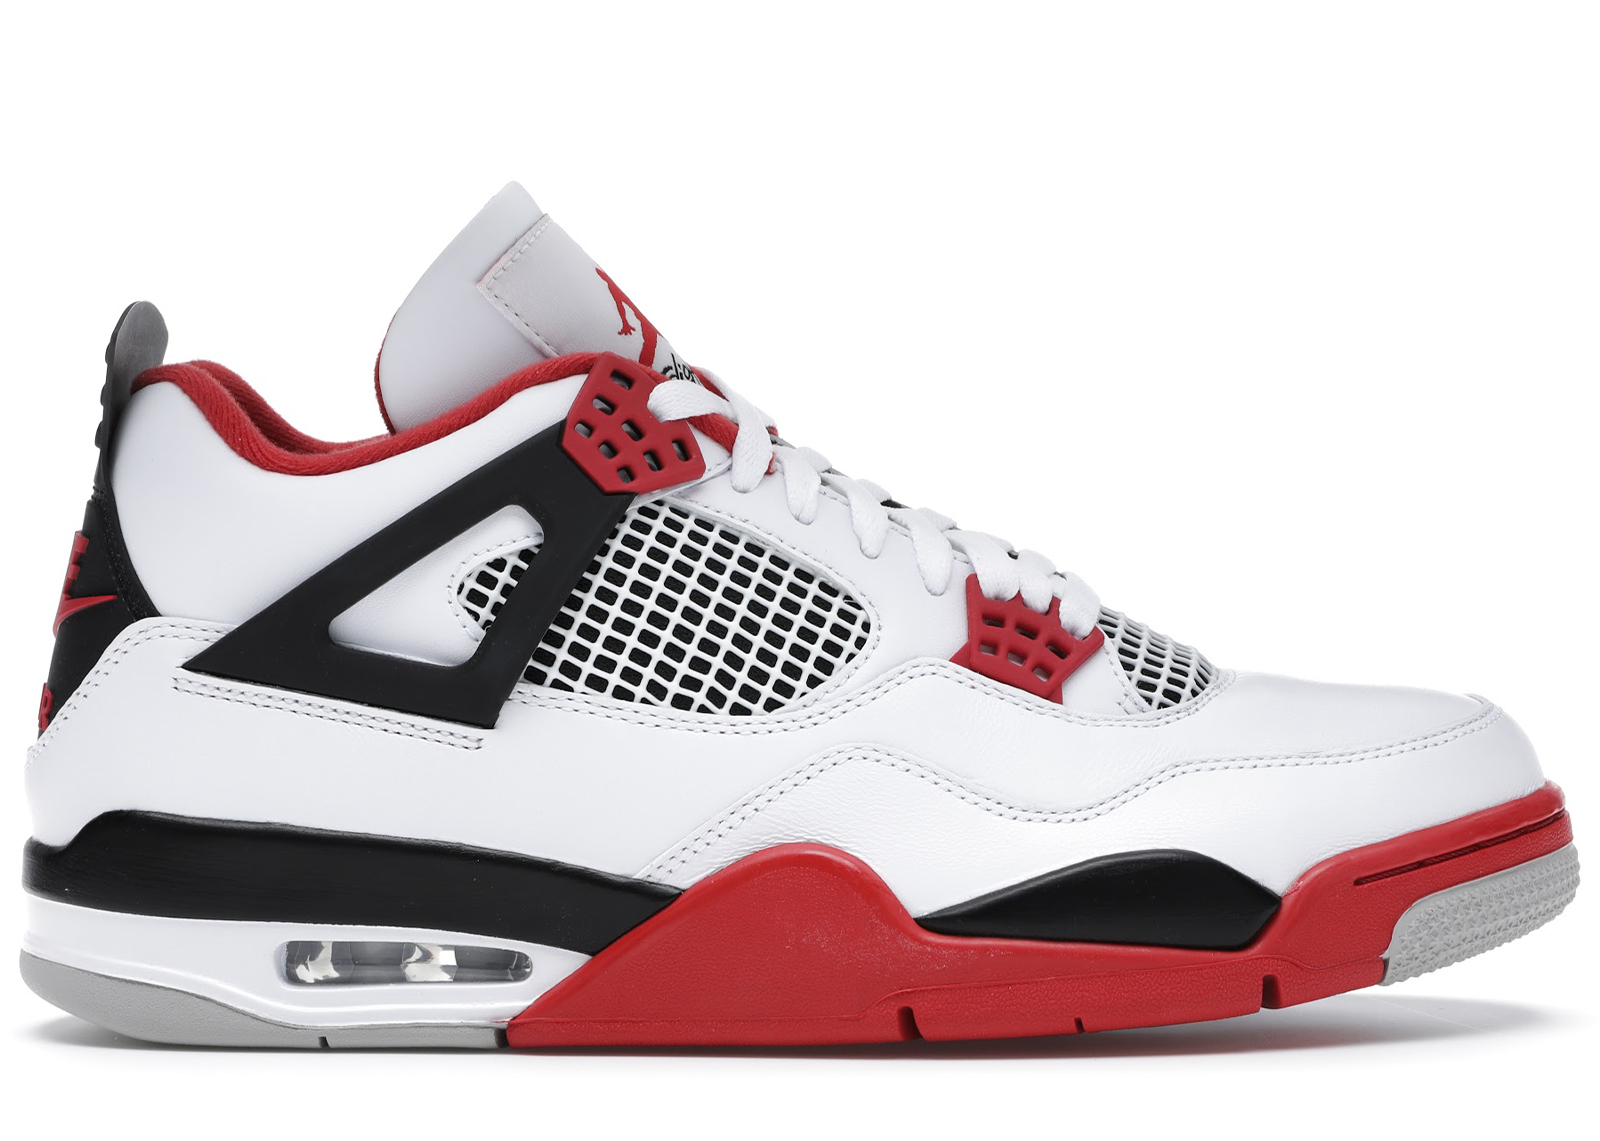 fire red 4s womens